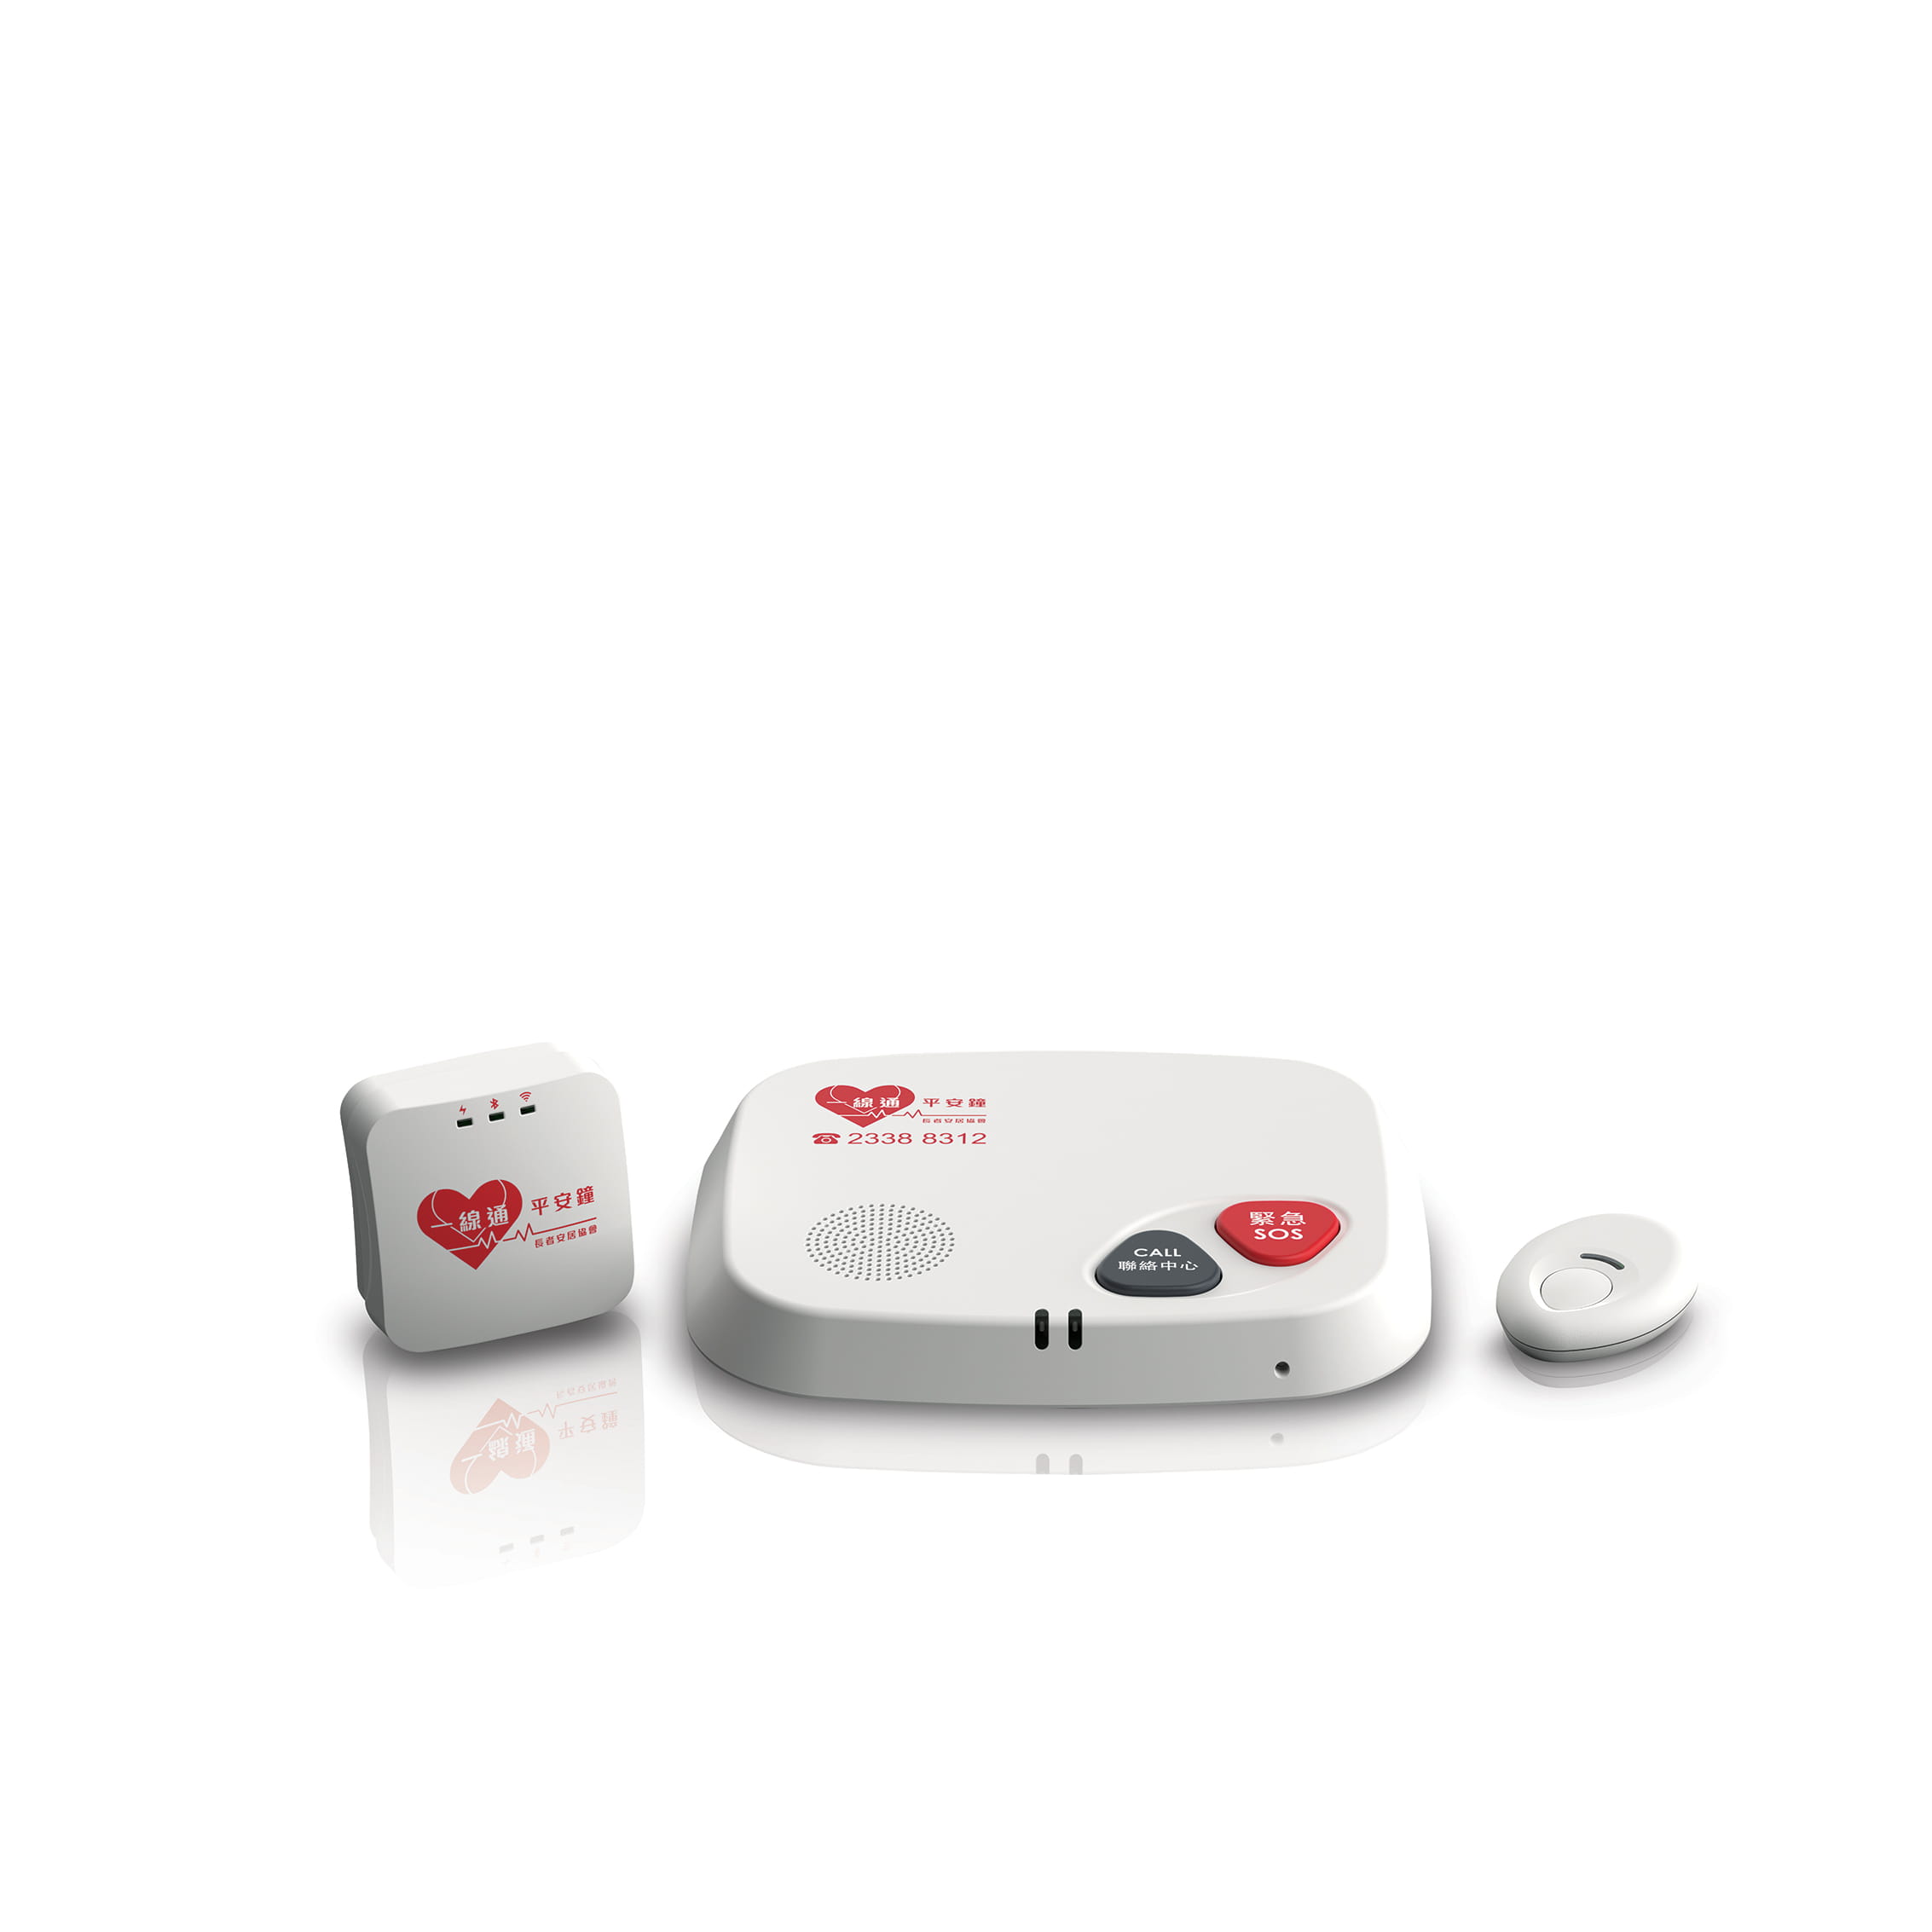 Nordic-powered wireless indoor alert system provides round-the-clock  assistance to service users - nordicsemi.com